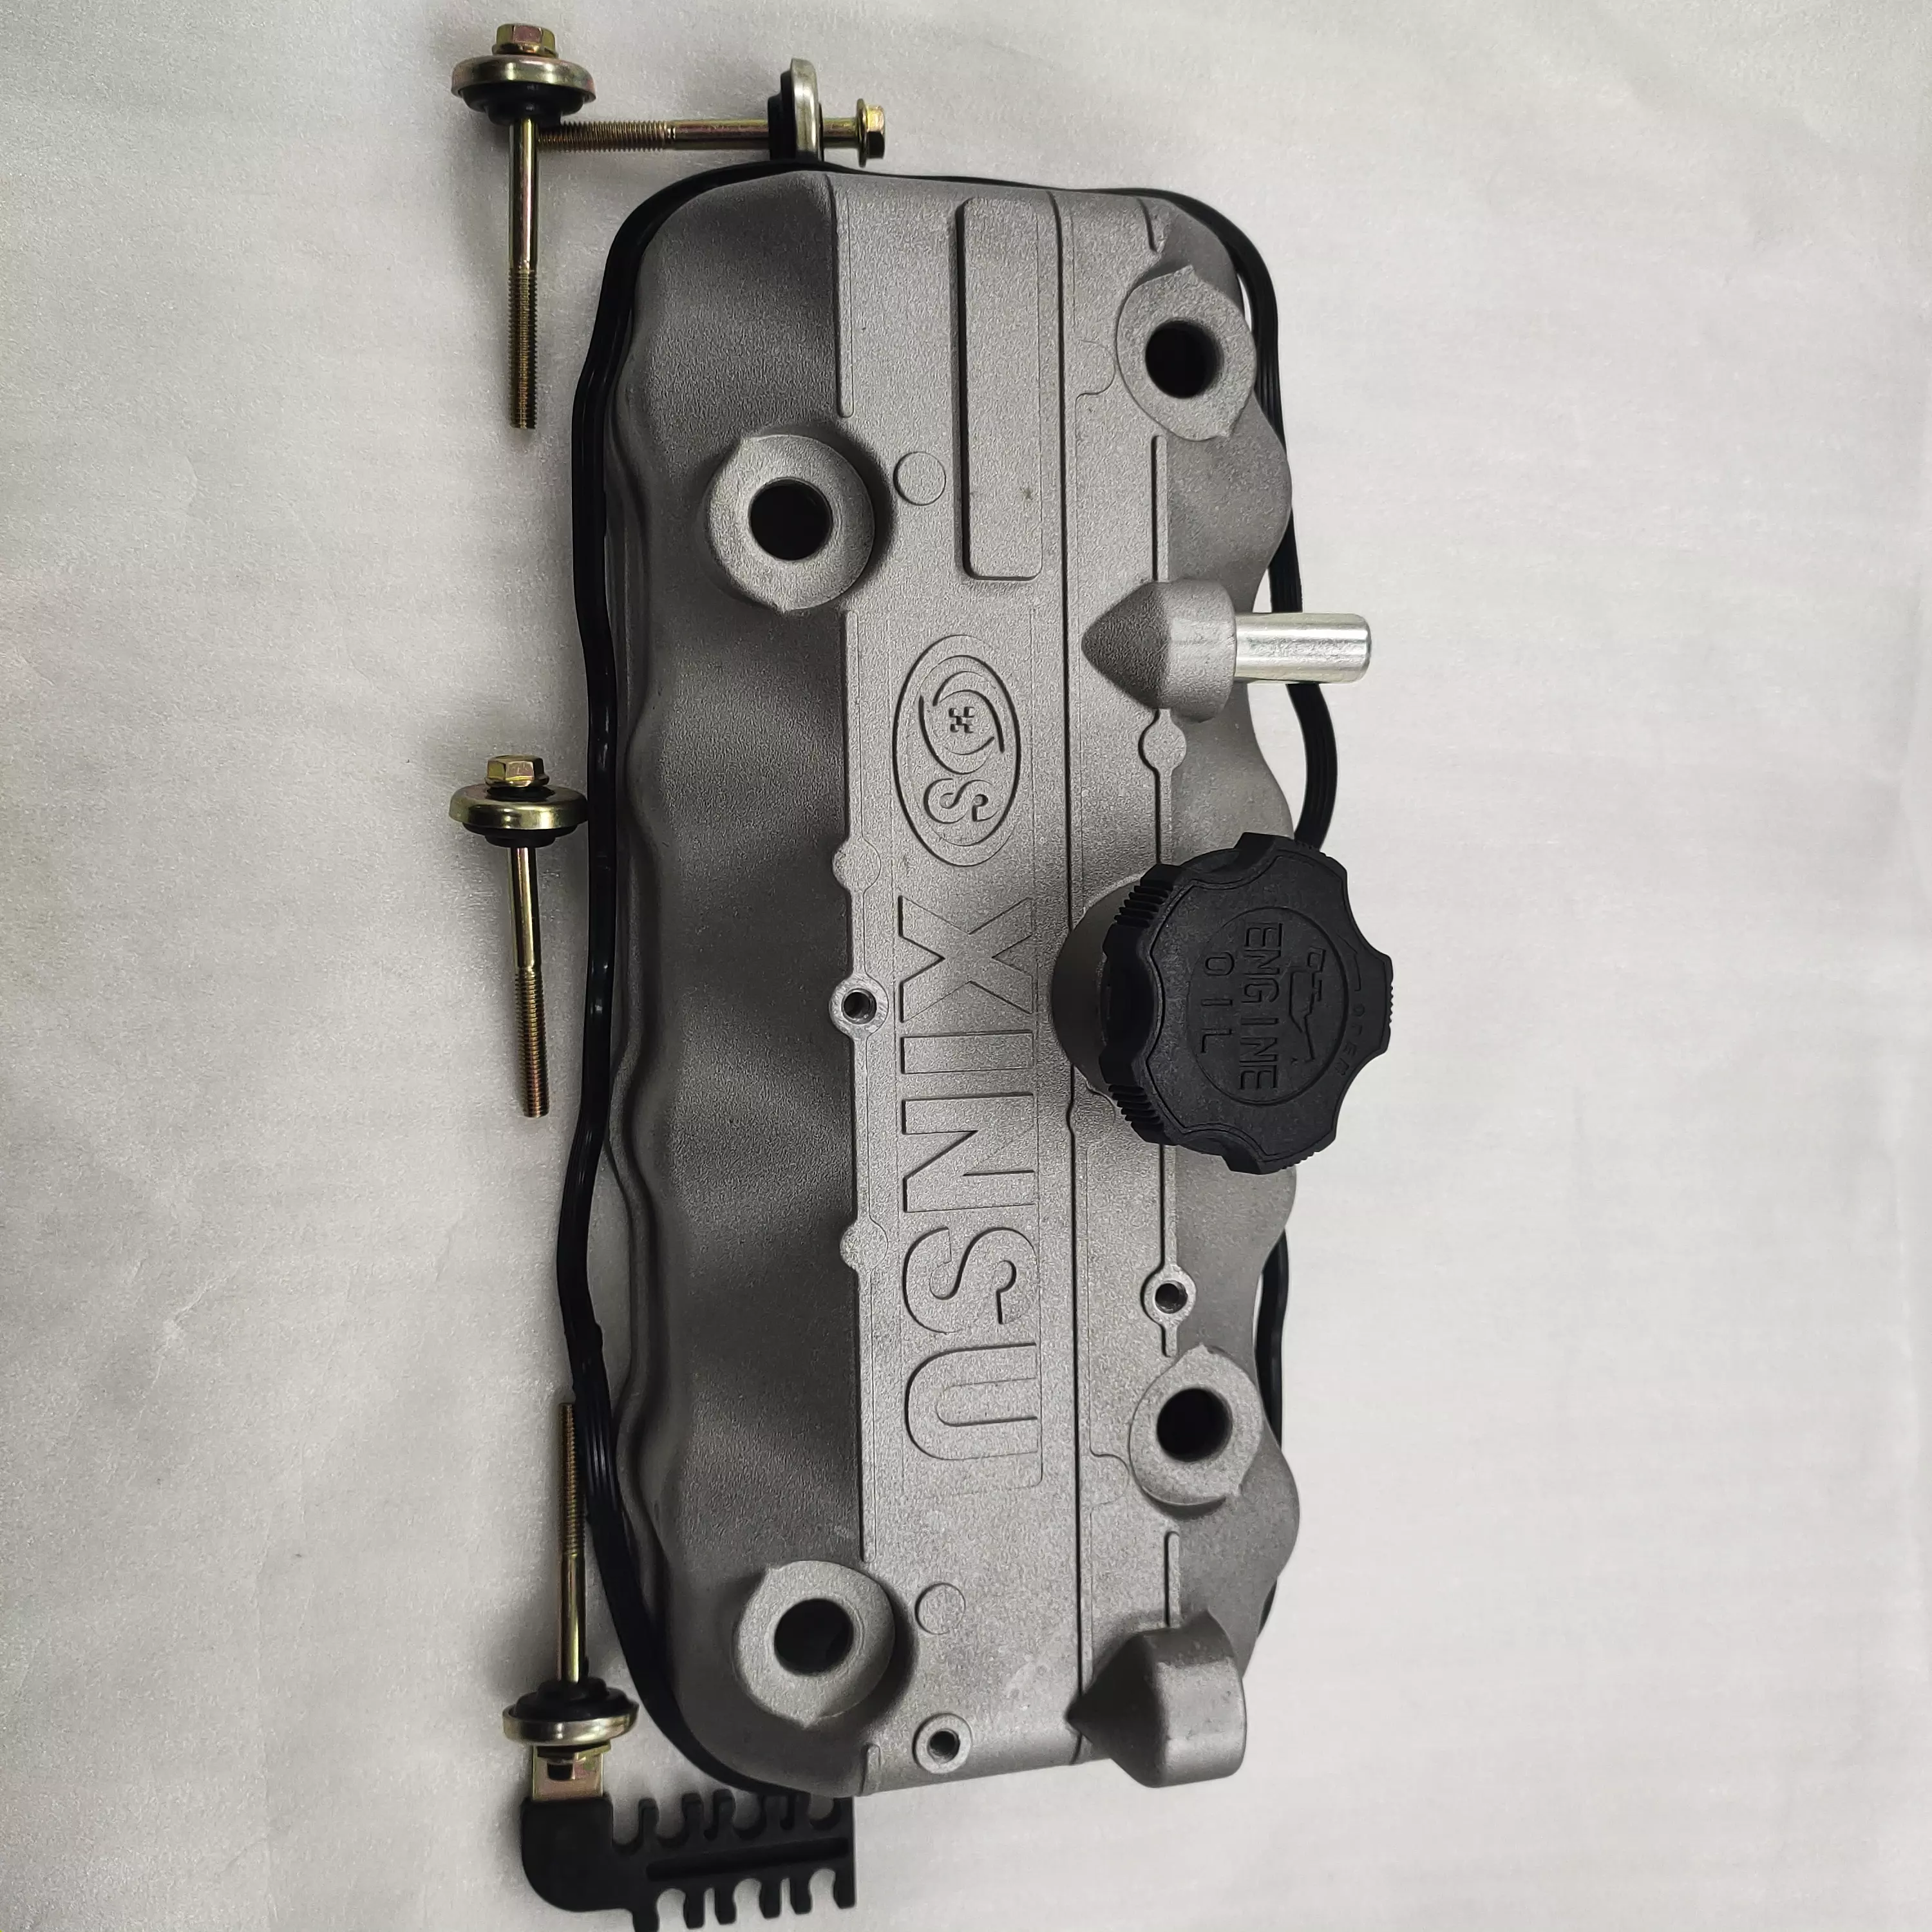 motorcycle 800cc engine Auto engine Cylinder head cover valve  chamber tricycle engine parts high quality factory direct sale